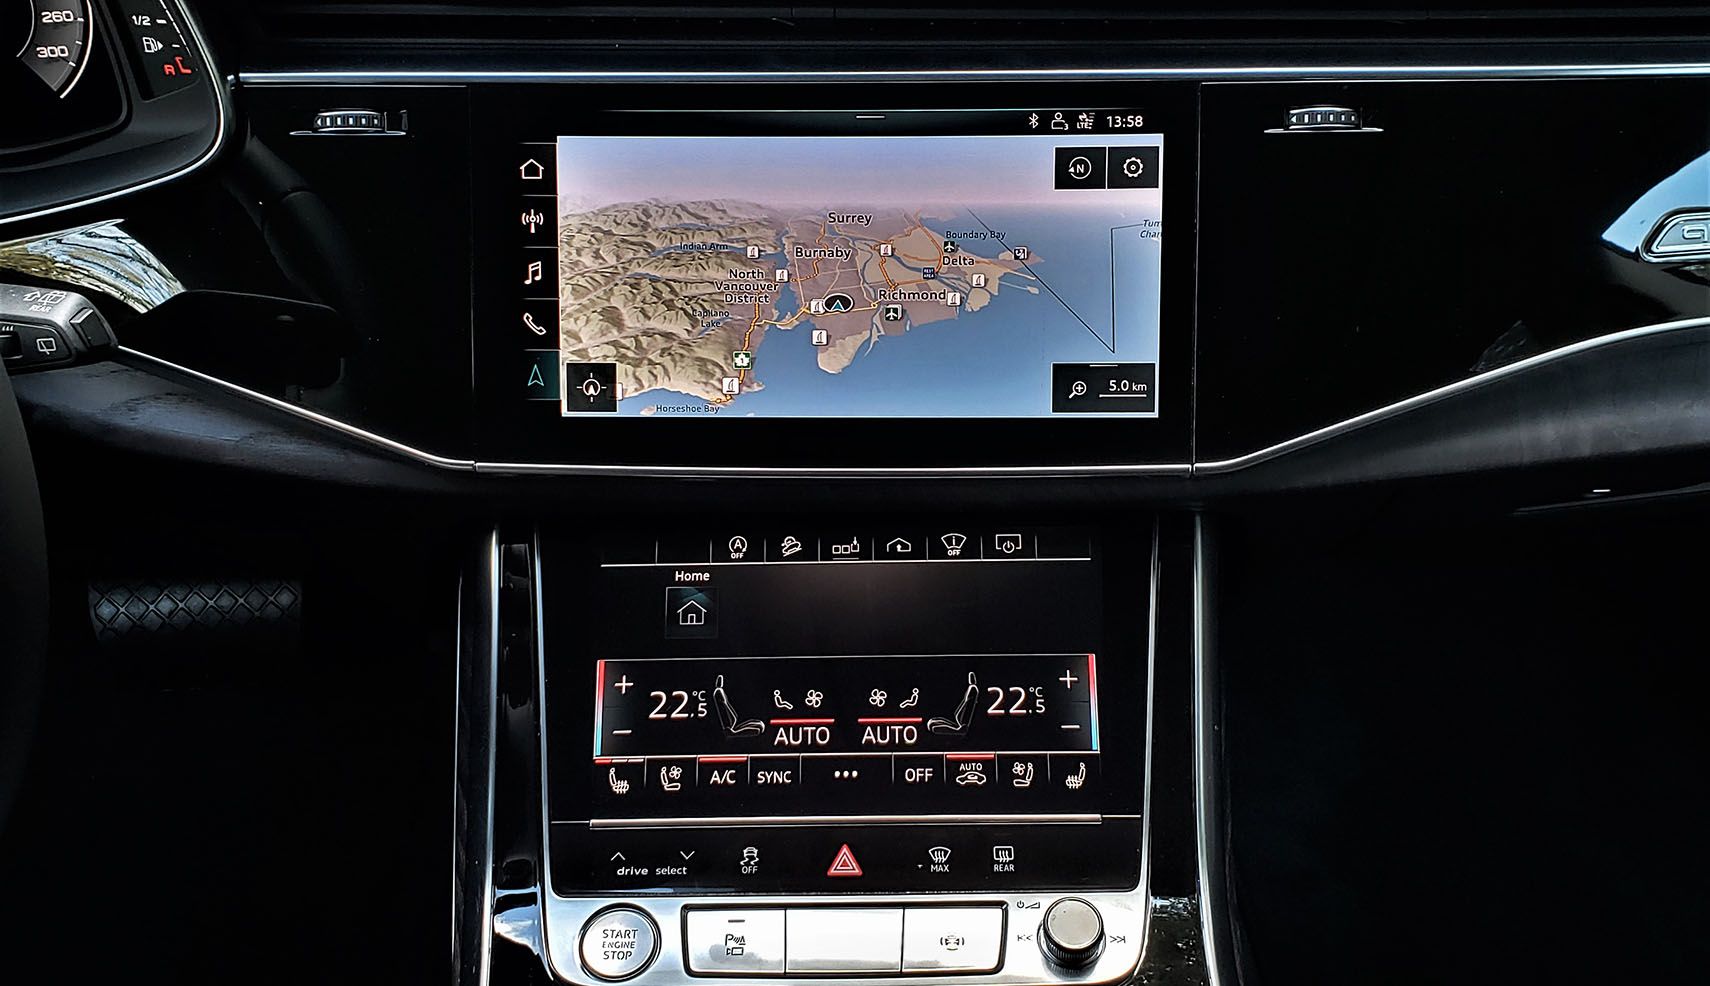 Audi's always impressive MMI is joined by a secondary HVAC control screen just below.